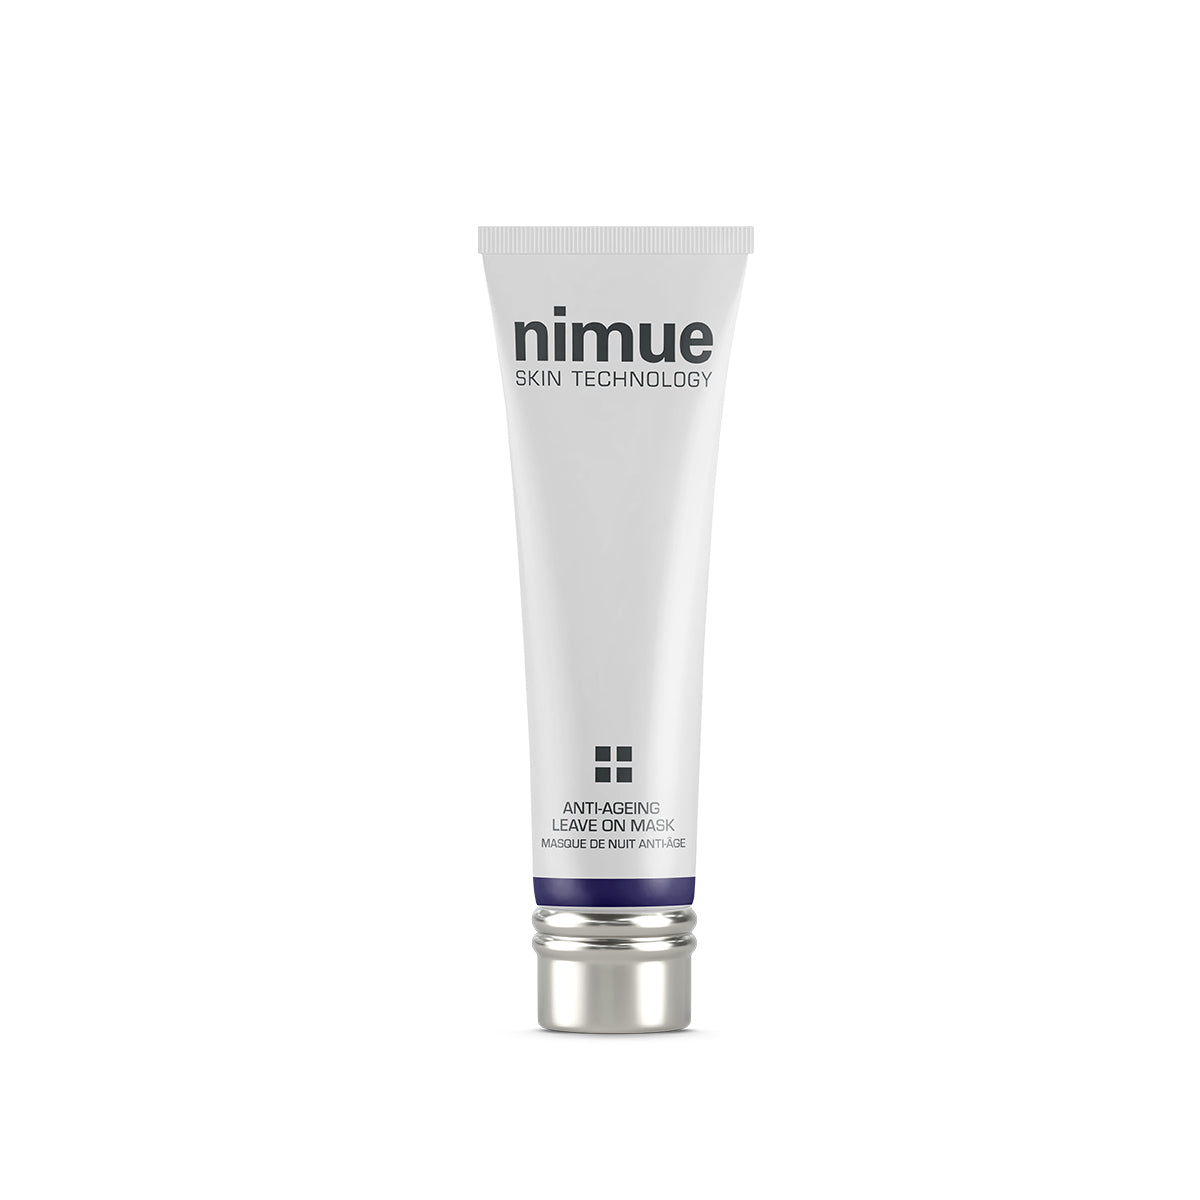 Nimue Anti-Ageing Leave on Mask